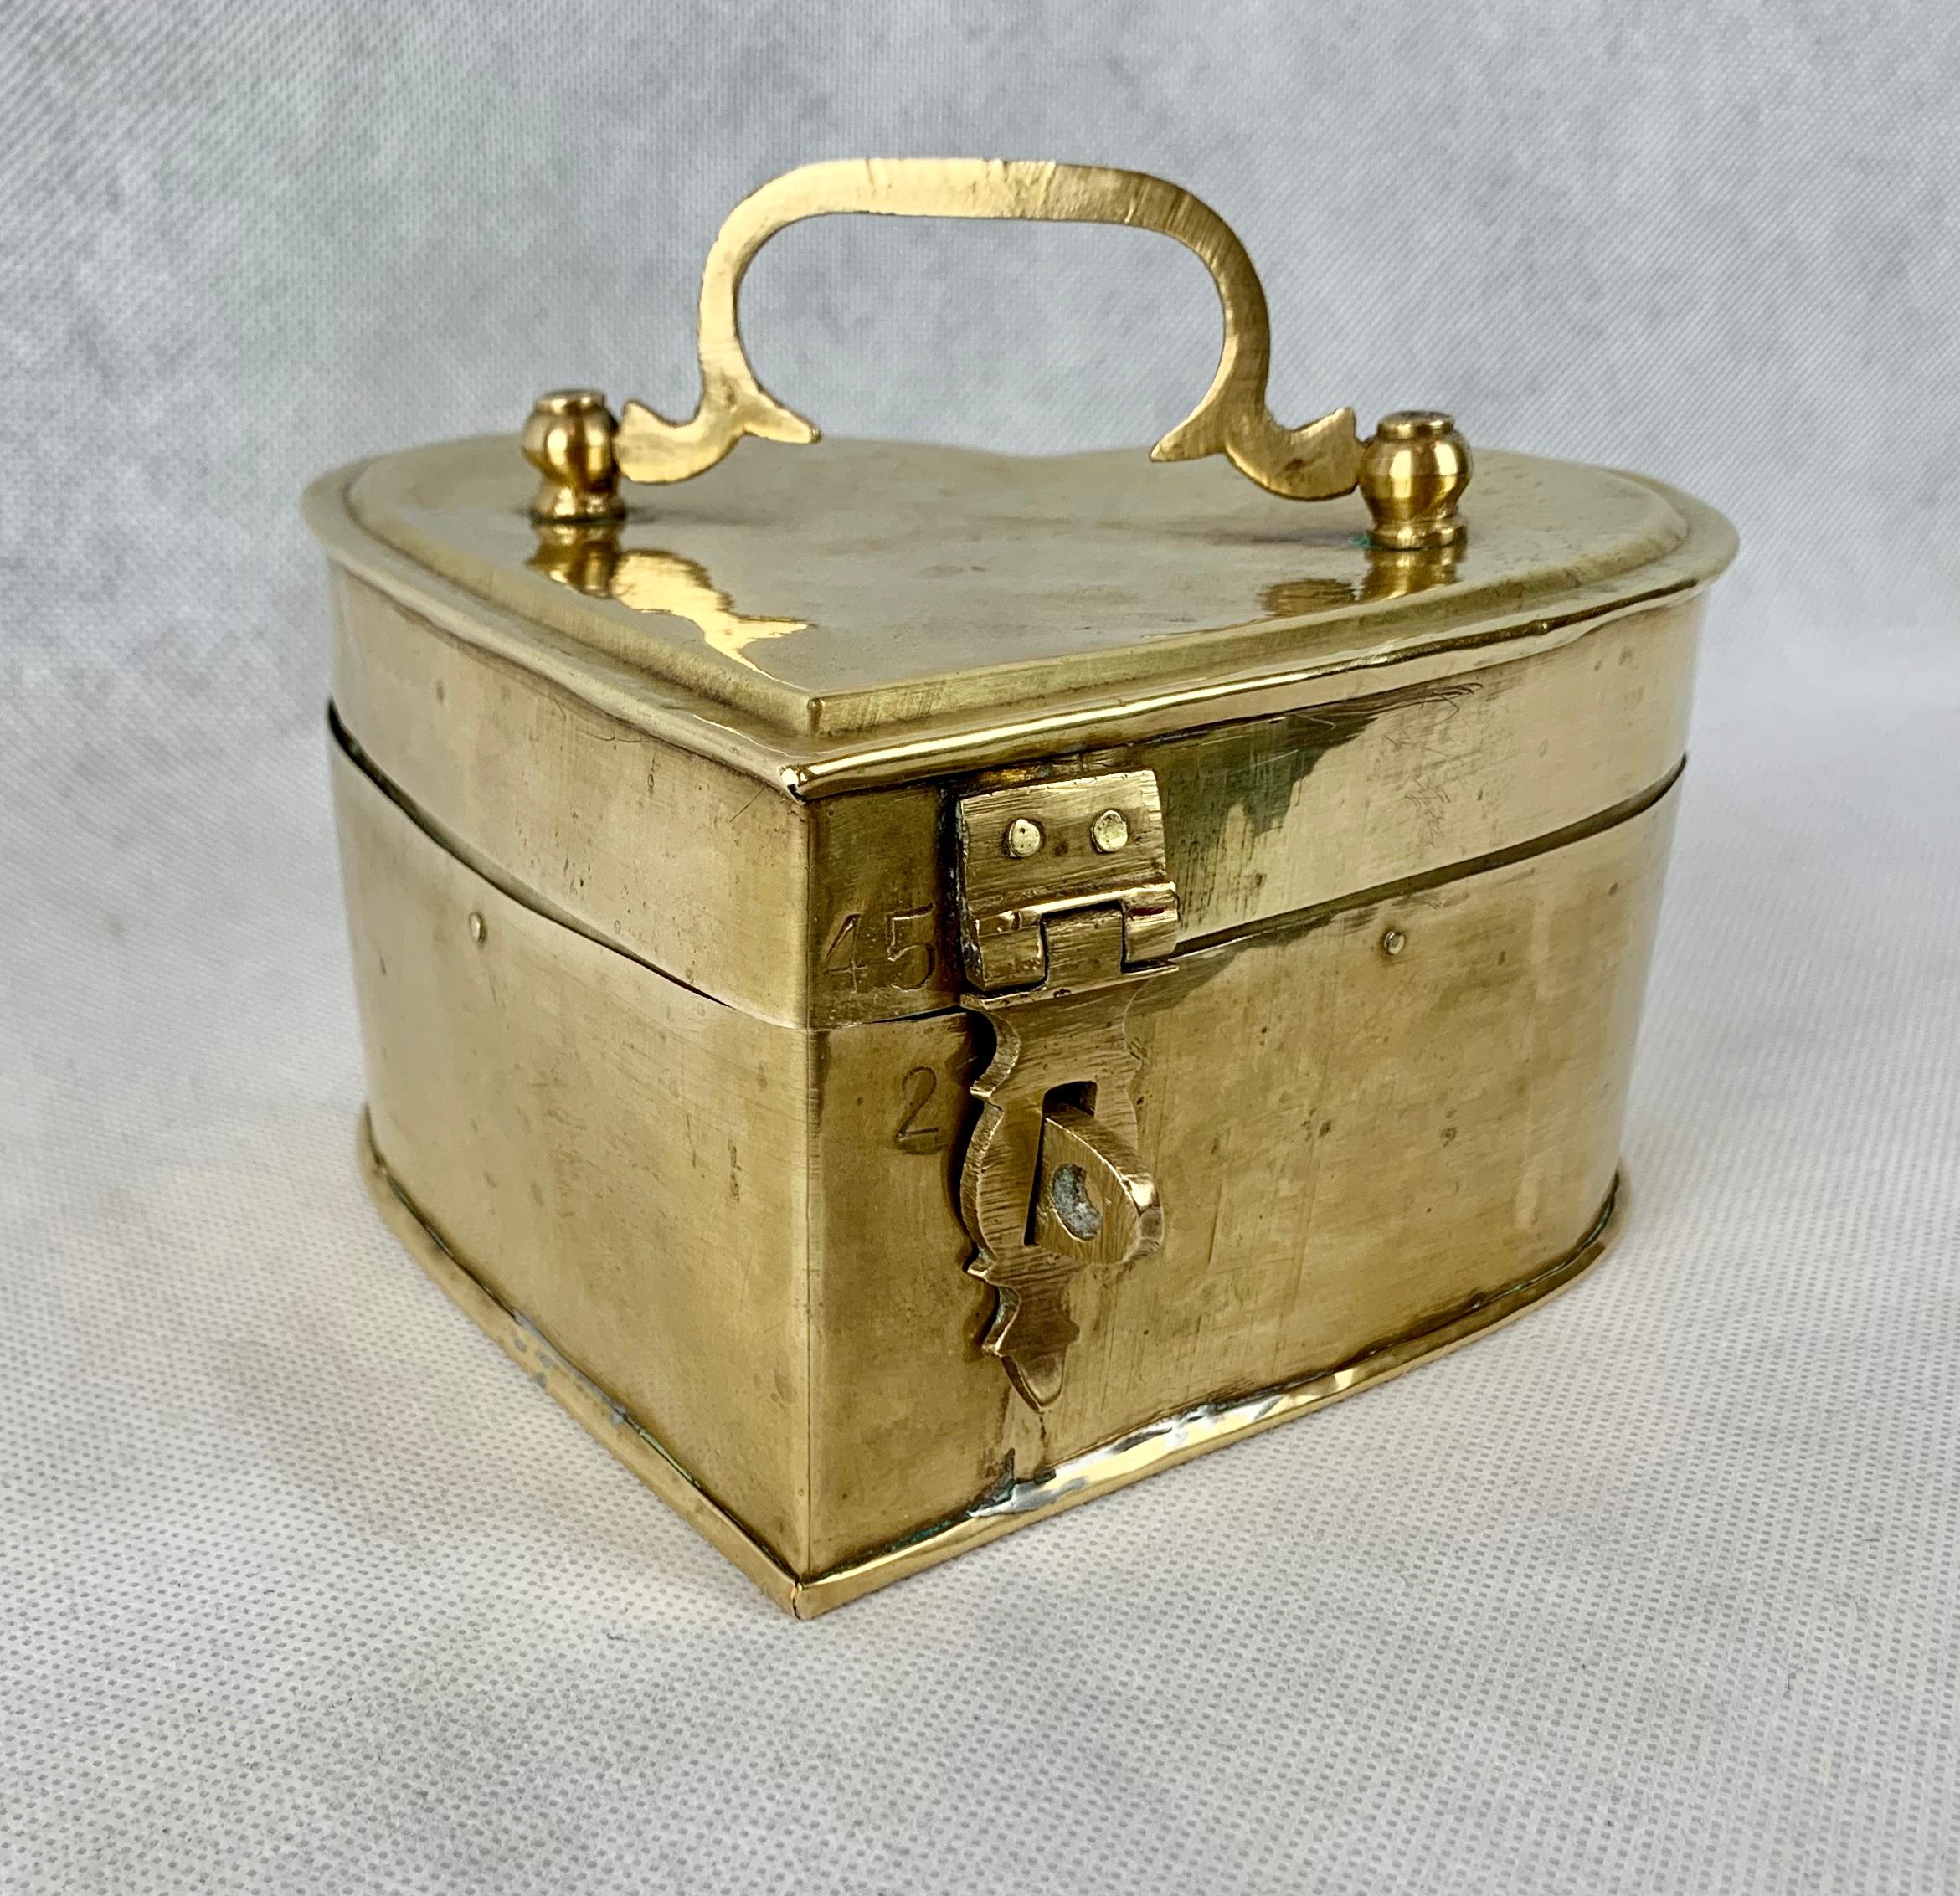 Interesting heart shaped hinged box in brass with a dfold down handle.  What makes it interesting is that it is obviously handcrafted.
Measures: Height-3 1/2